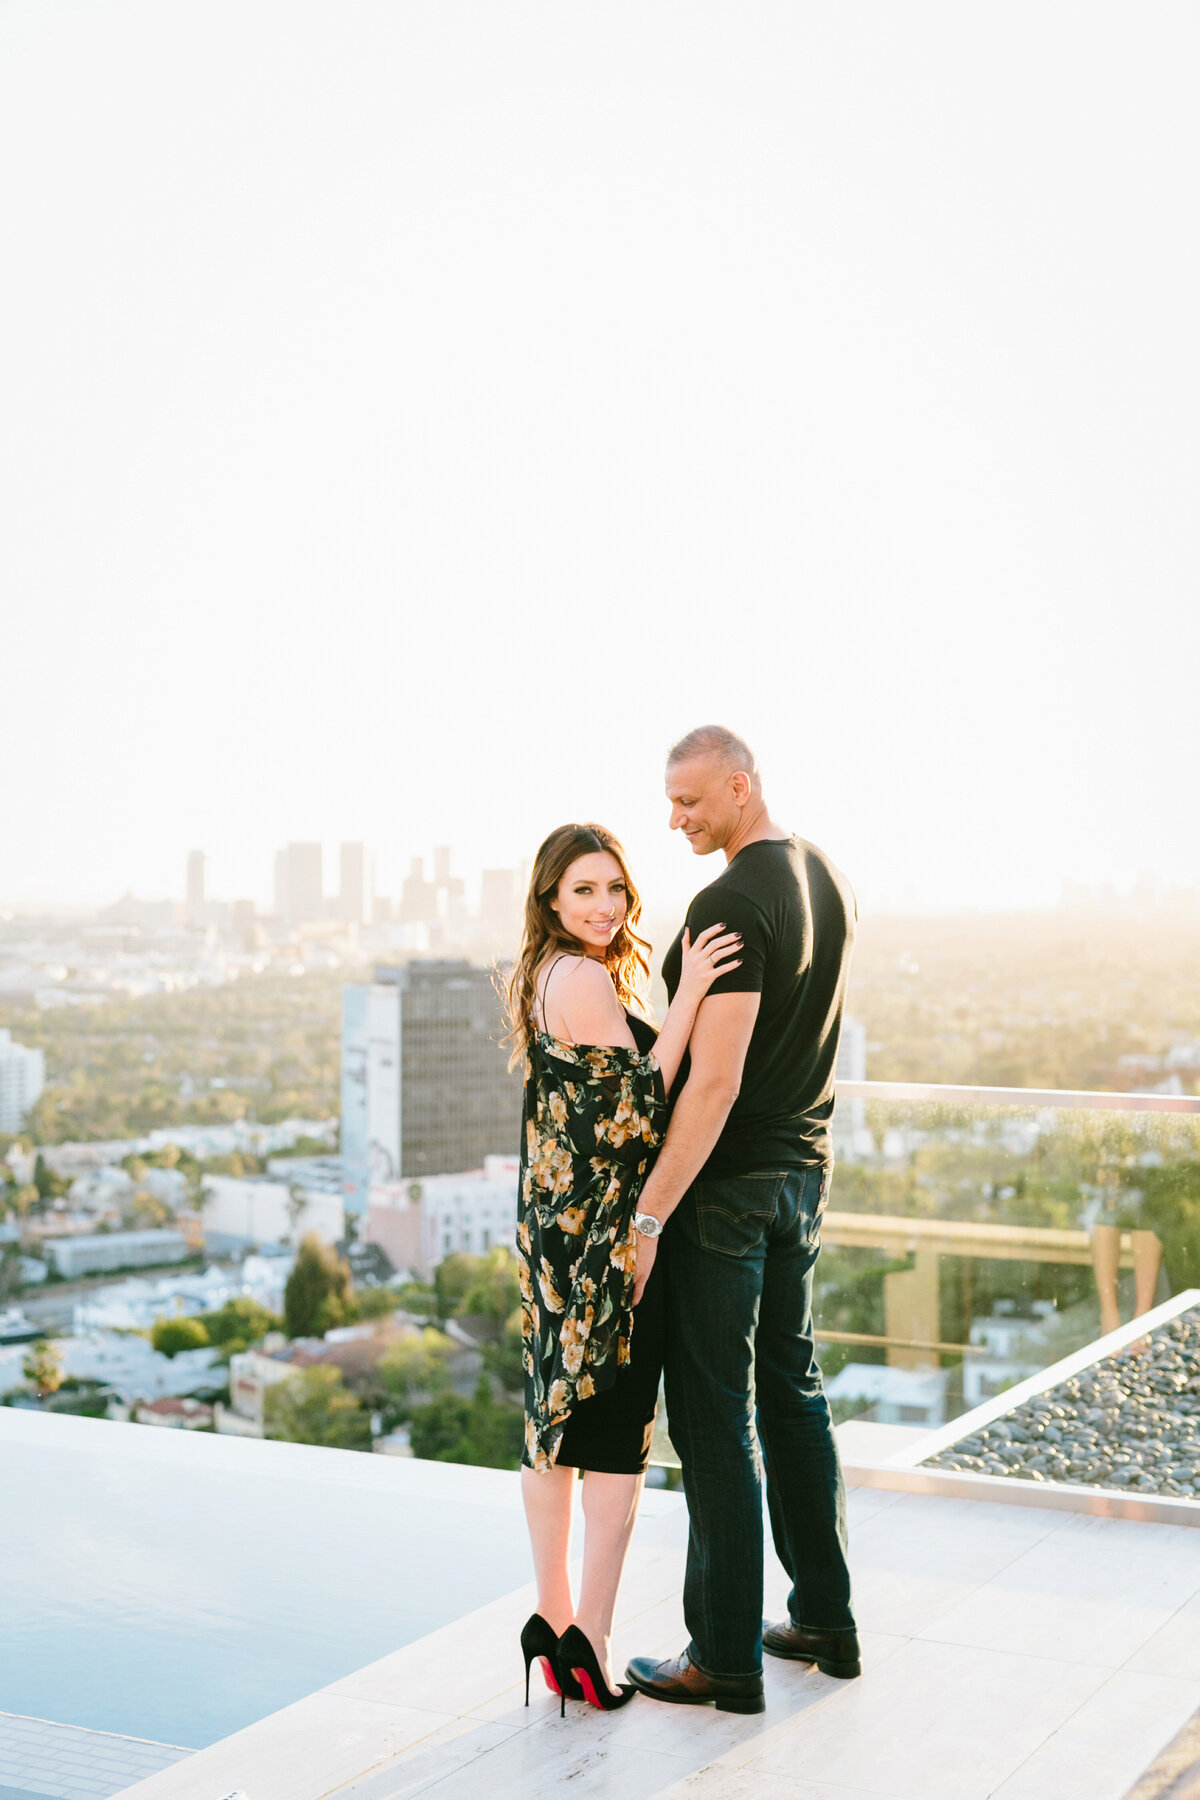 Best California and Texas Engagement Photographer-Jodee Debes Photography-226